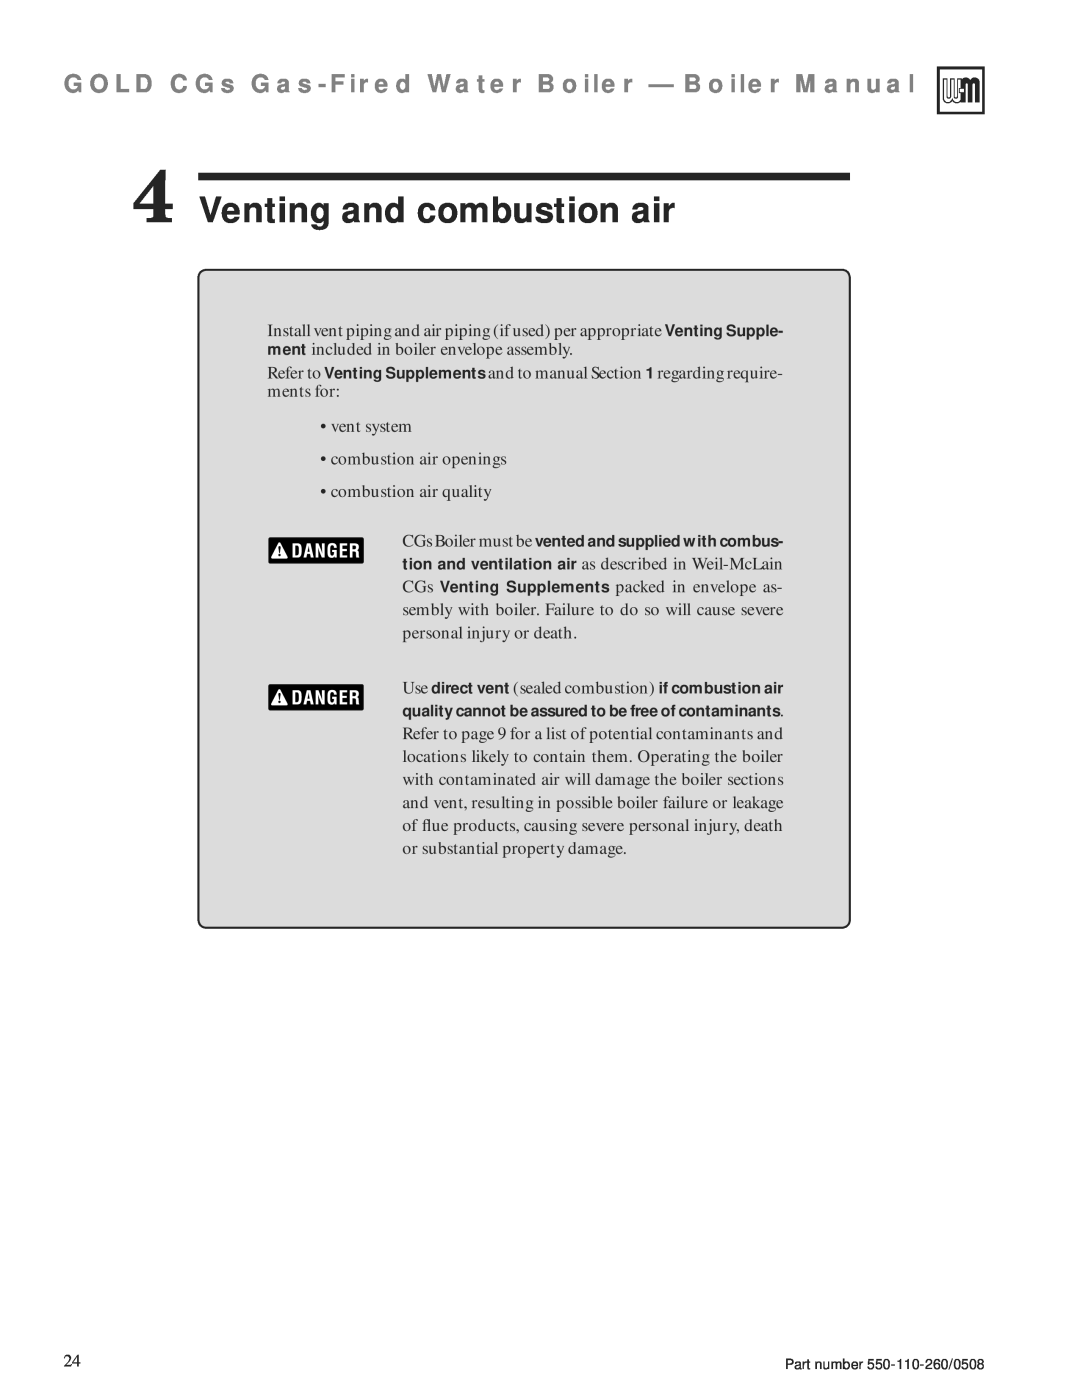 Weil-McLain 550-110-260/0508 manual Venting and combustion air, GOLD CGs Gas-FiredWater Boiler — Boiler Manual 